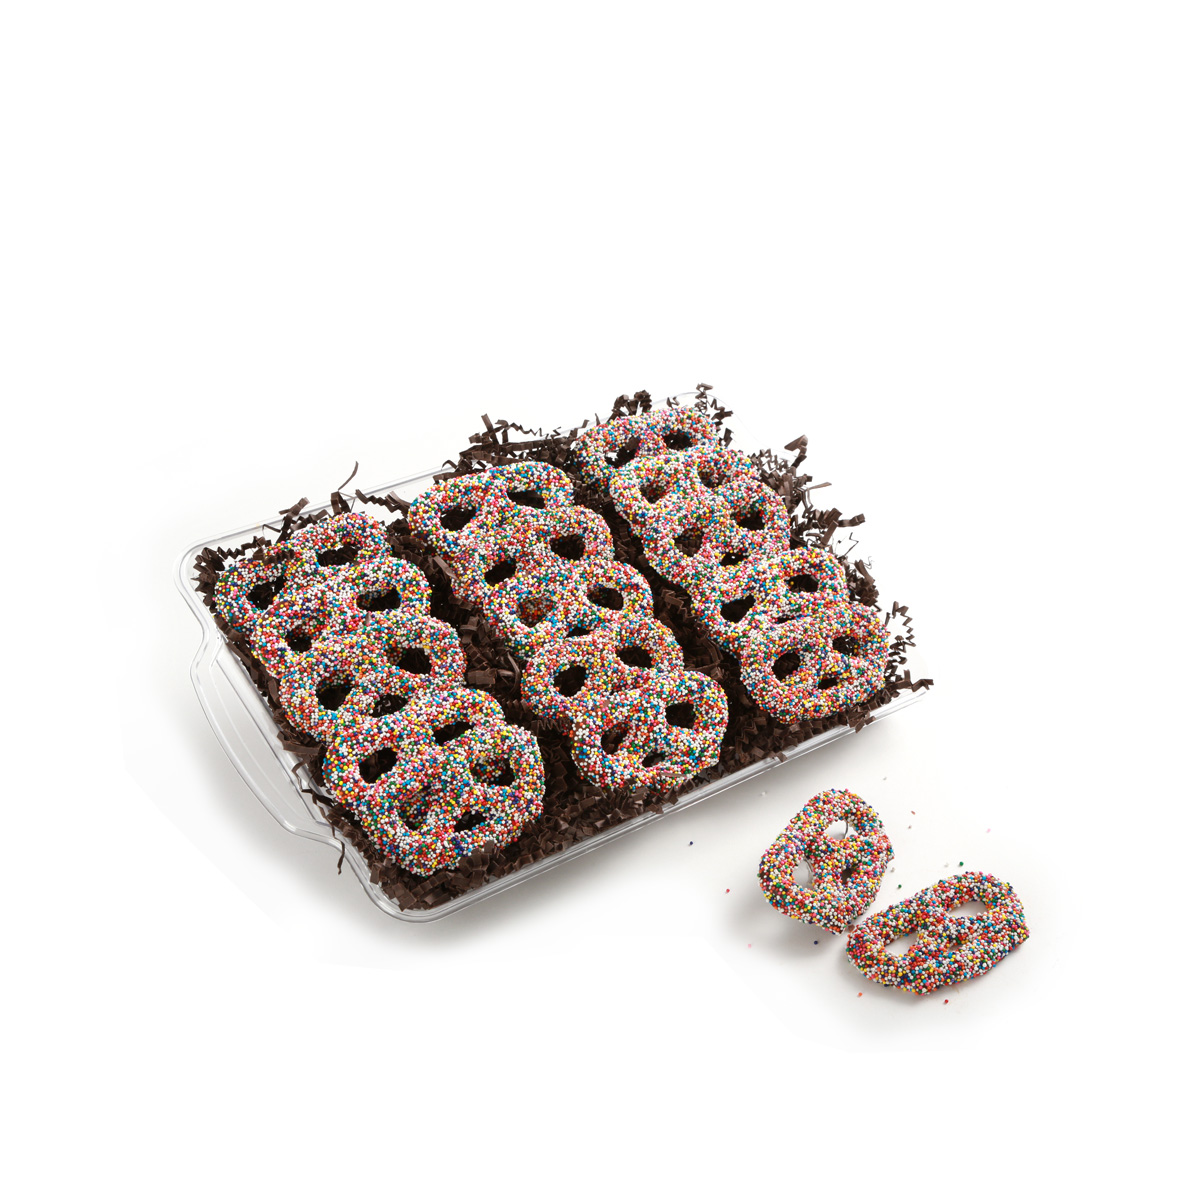 Chocolate Covered Pretzels with Sprinkles